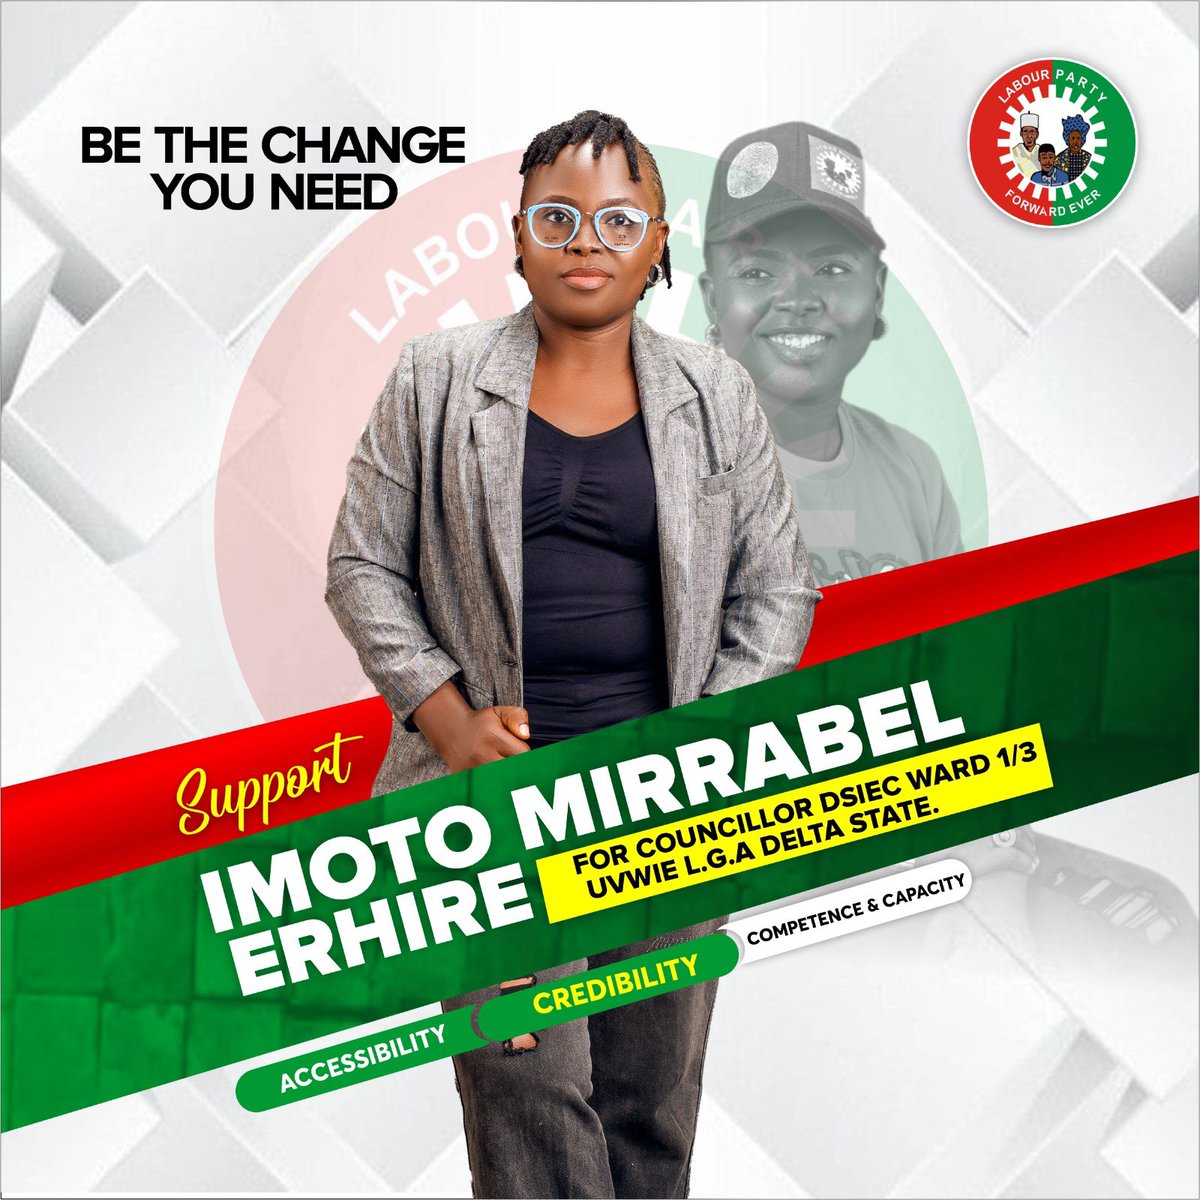 Please let’s support one of our own. @imirrabel